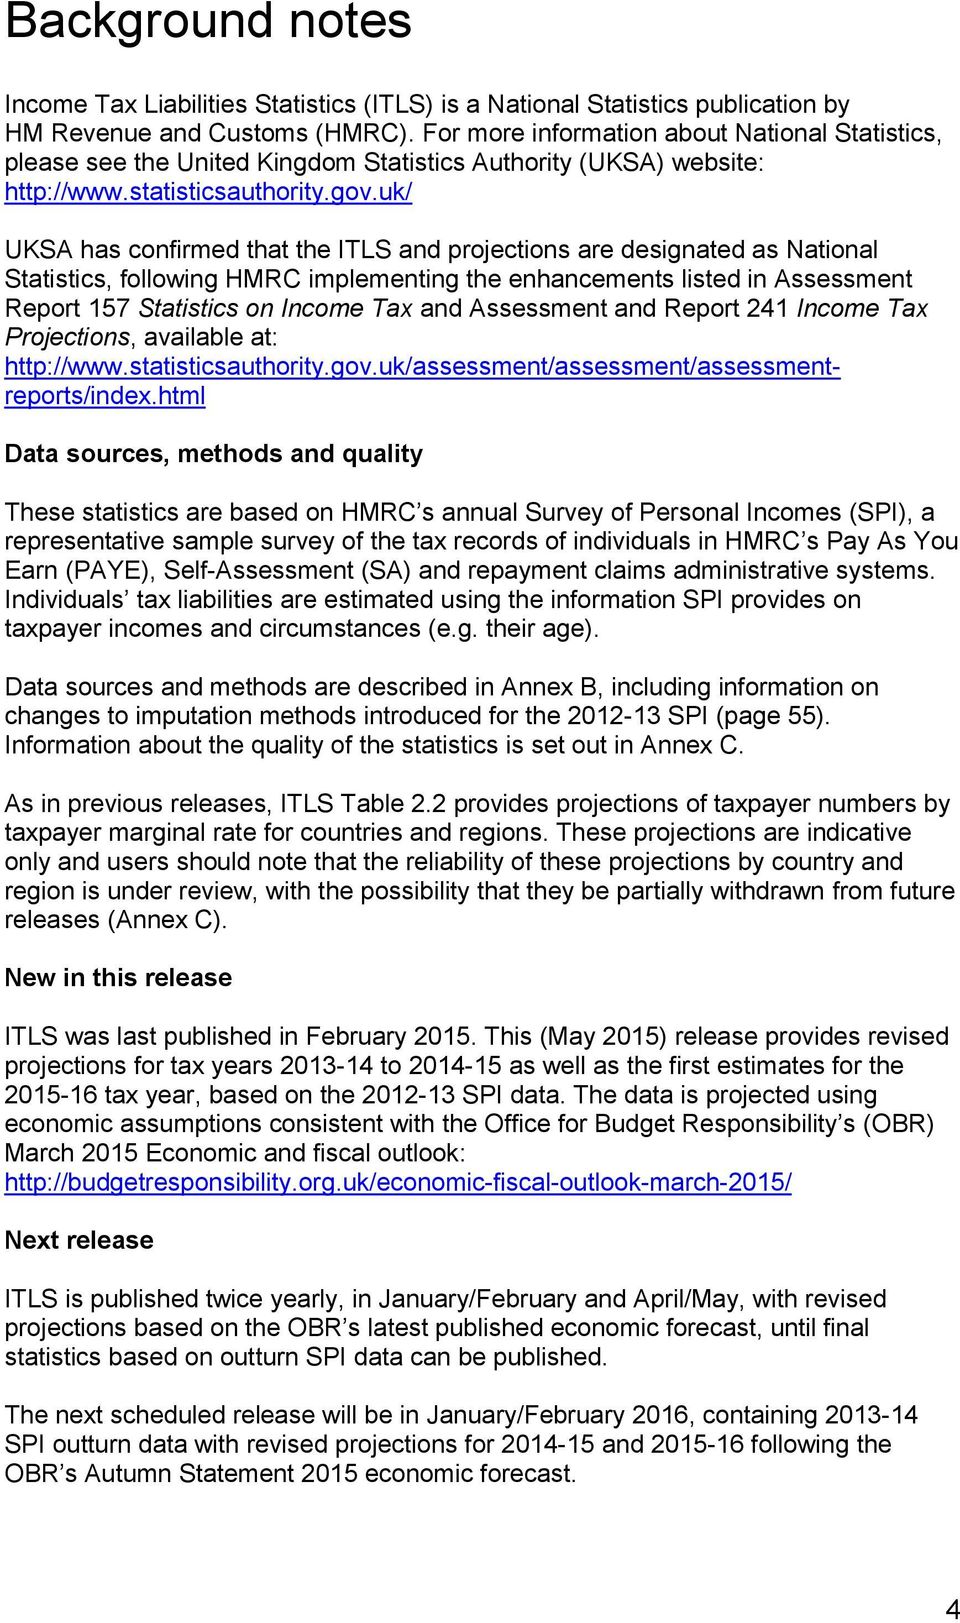 uk/ UKSA has confirmed that the ITLS and projections are designated as National Statistics, following HMRC implementing the enhancements listed in Assessment Report 157 Statistics on Income Tax and